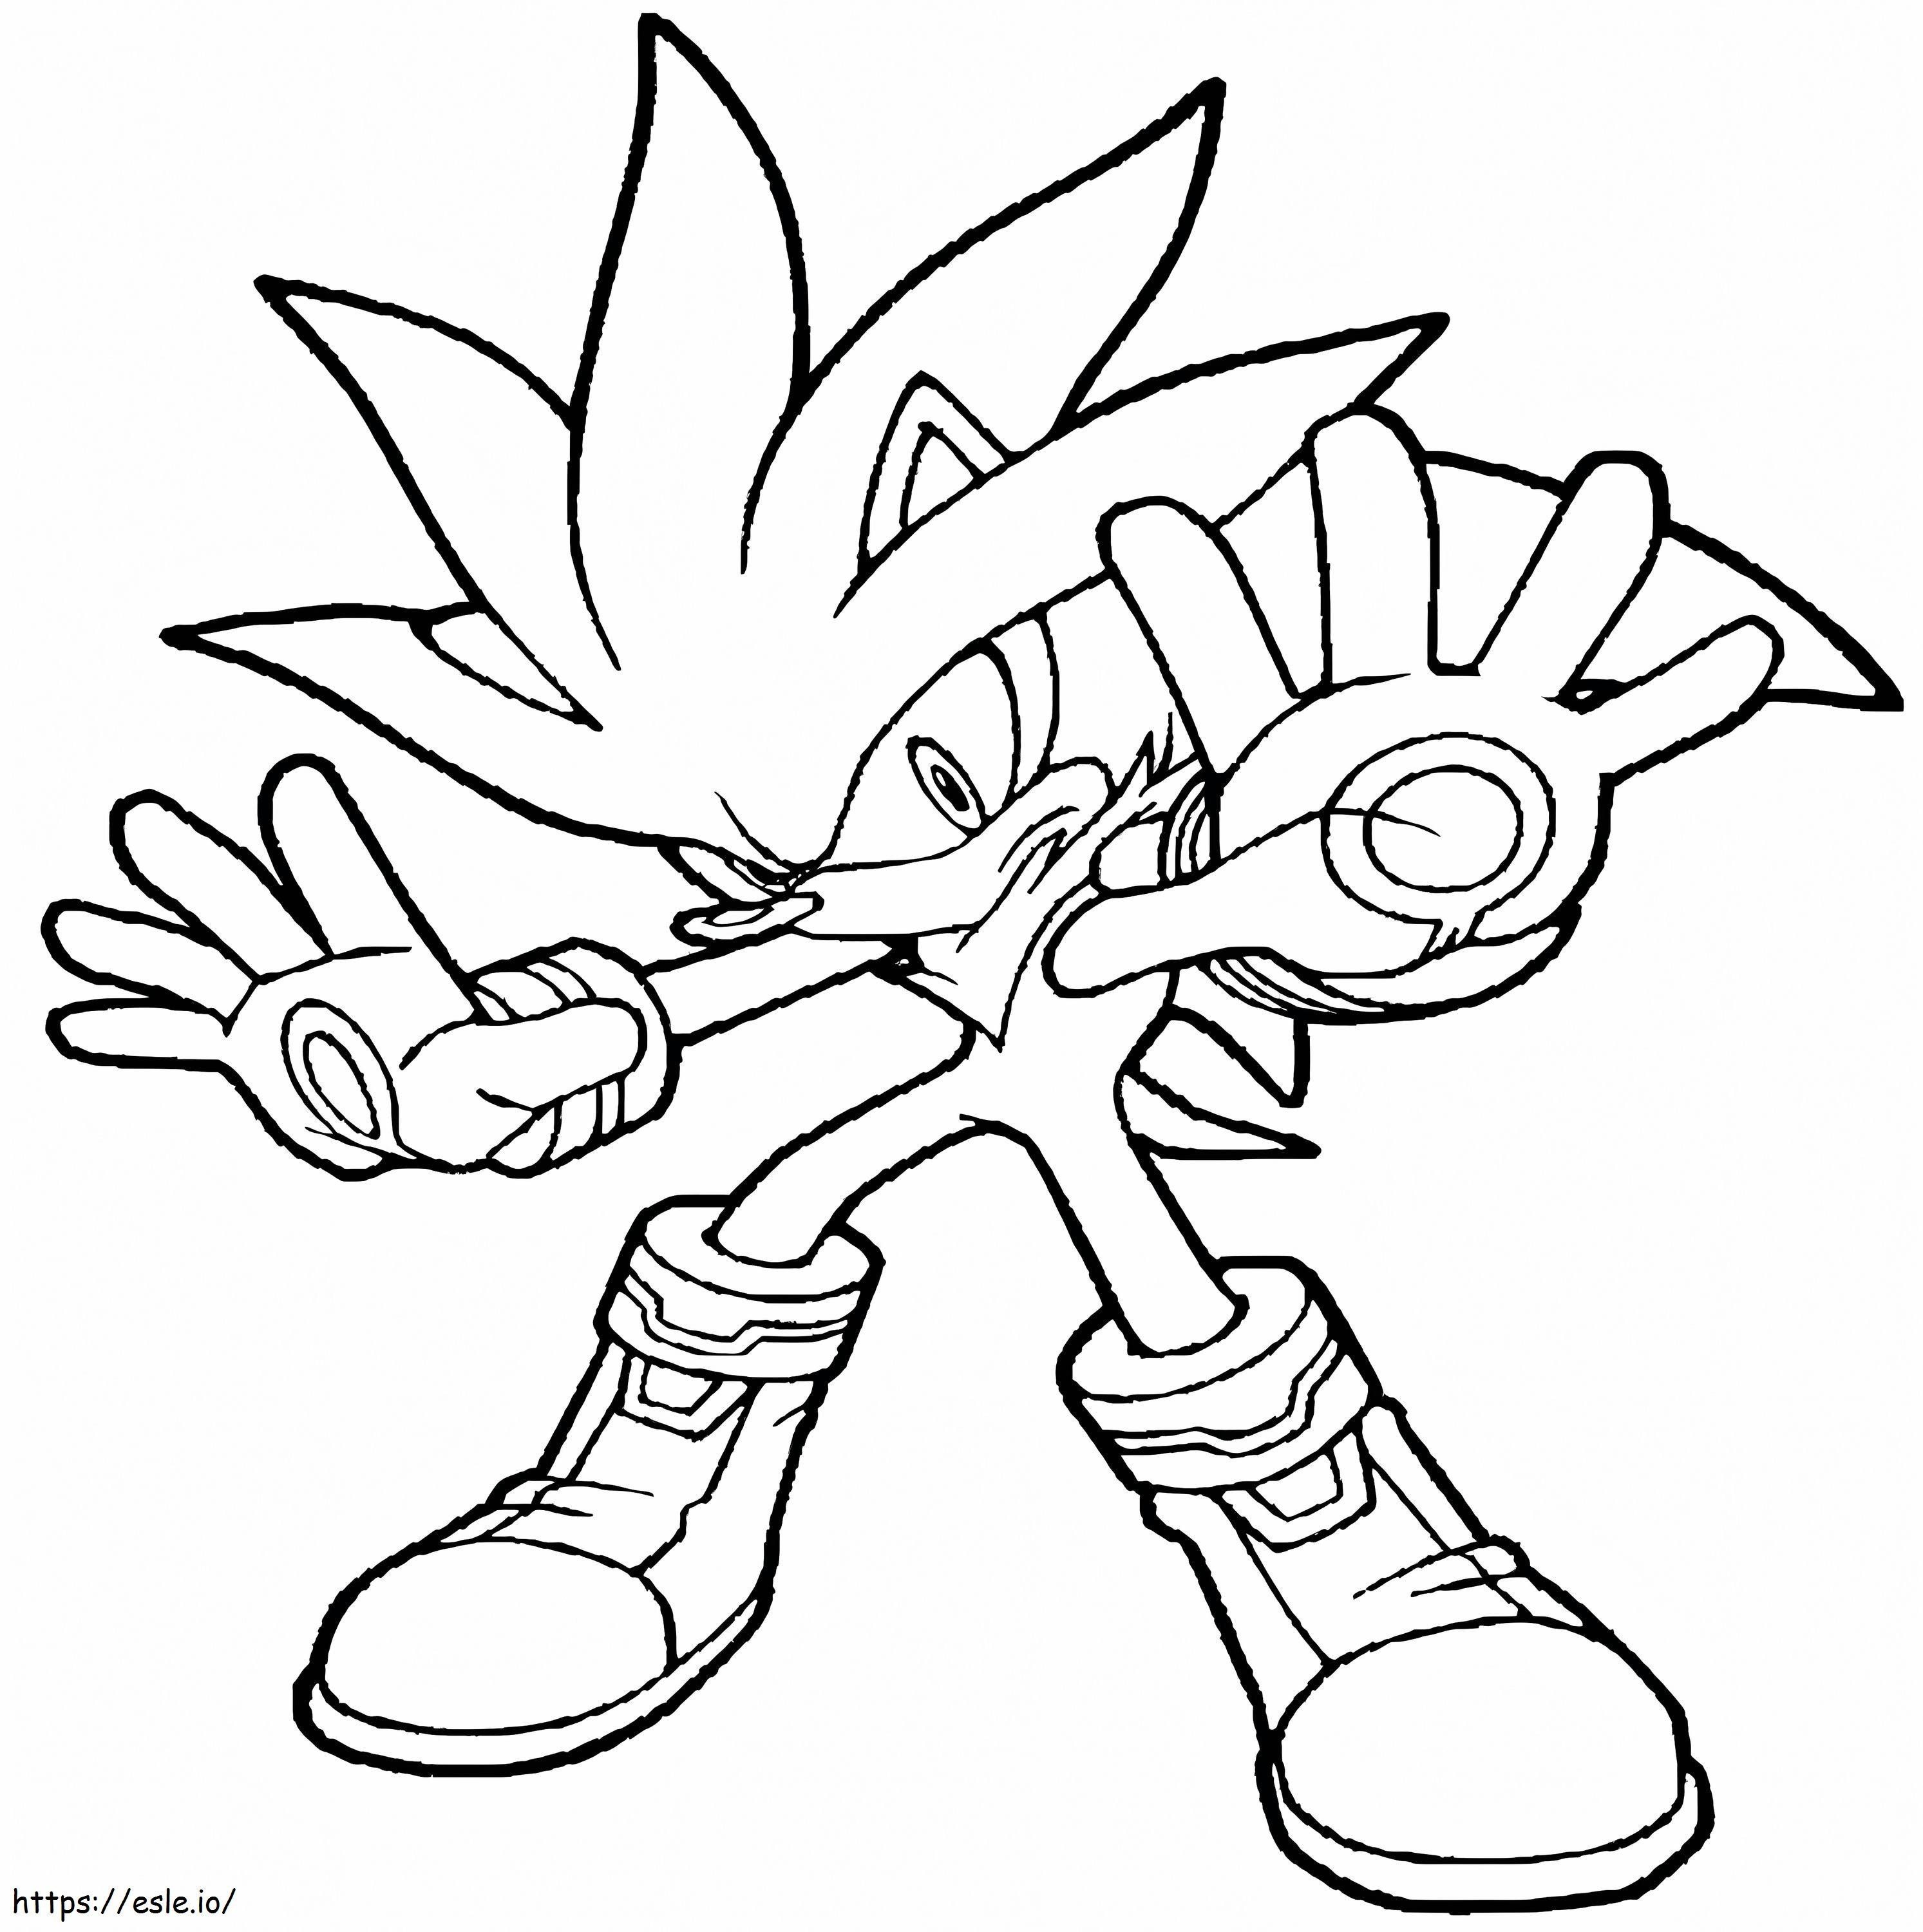 HD Sonic Image coloring page